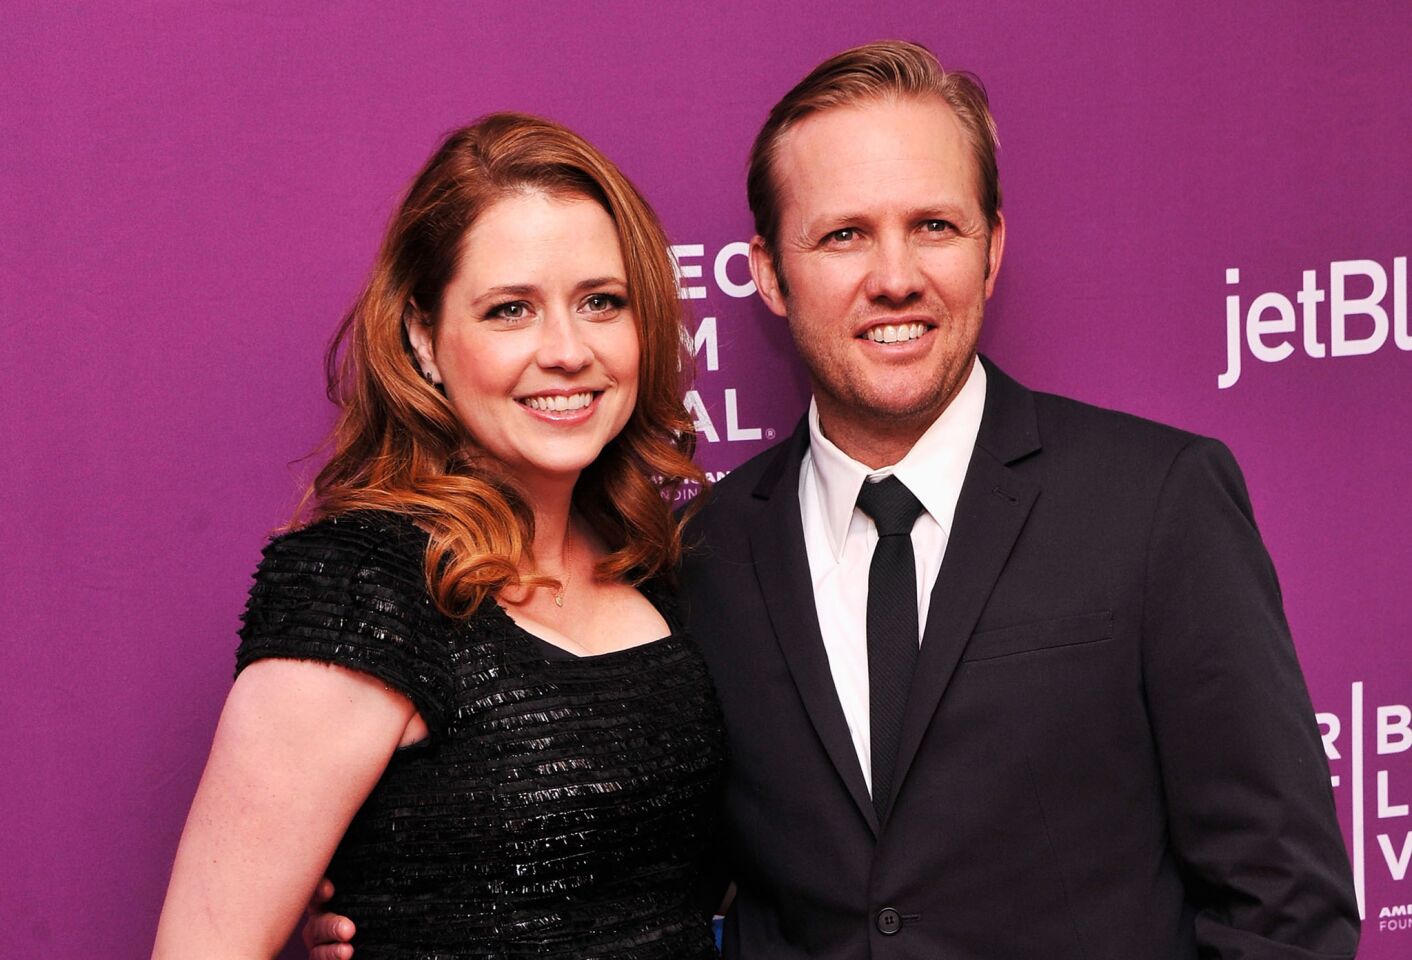 "The Office" actress Jenna Fischer and her screenwriter husband, Lee Kirk, are now second-time parents to Harper Marie. Harper will join older sister Weston Lee. Fischer told UsWeekly, "I love going from two people to three people."